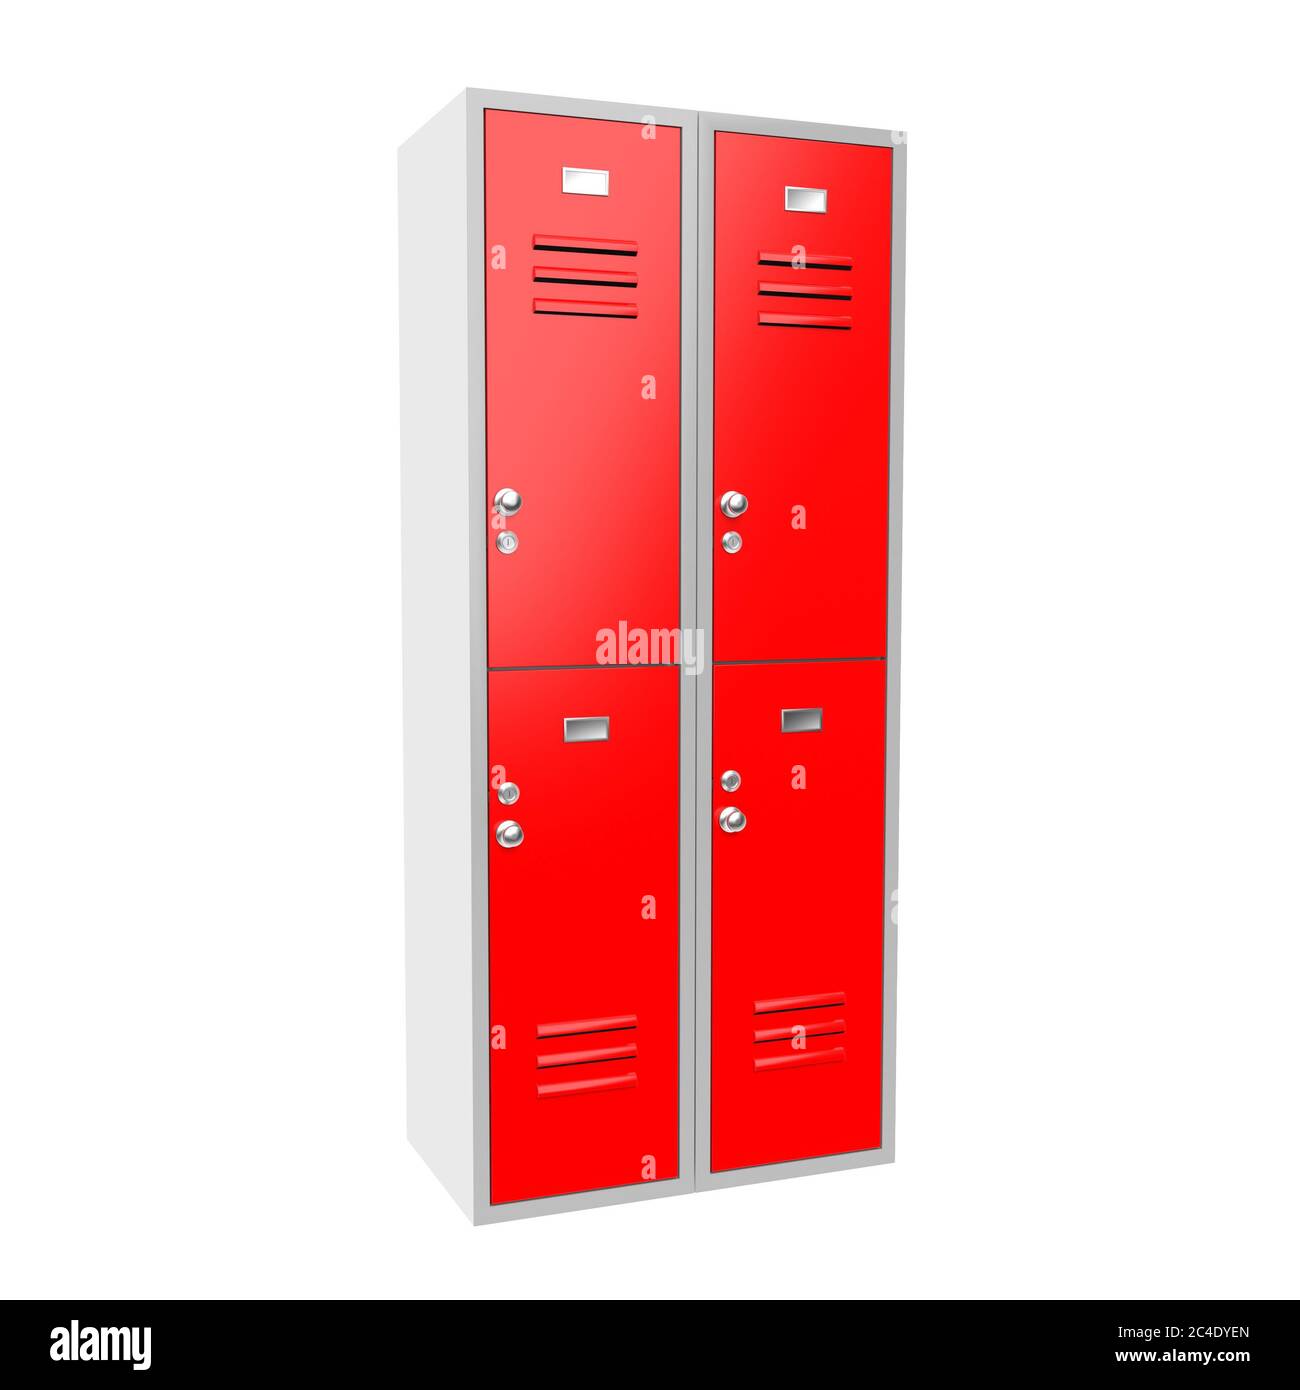 Red two level gym lockers. 3d rendering illustration Stock Photo